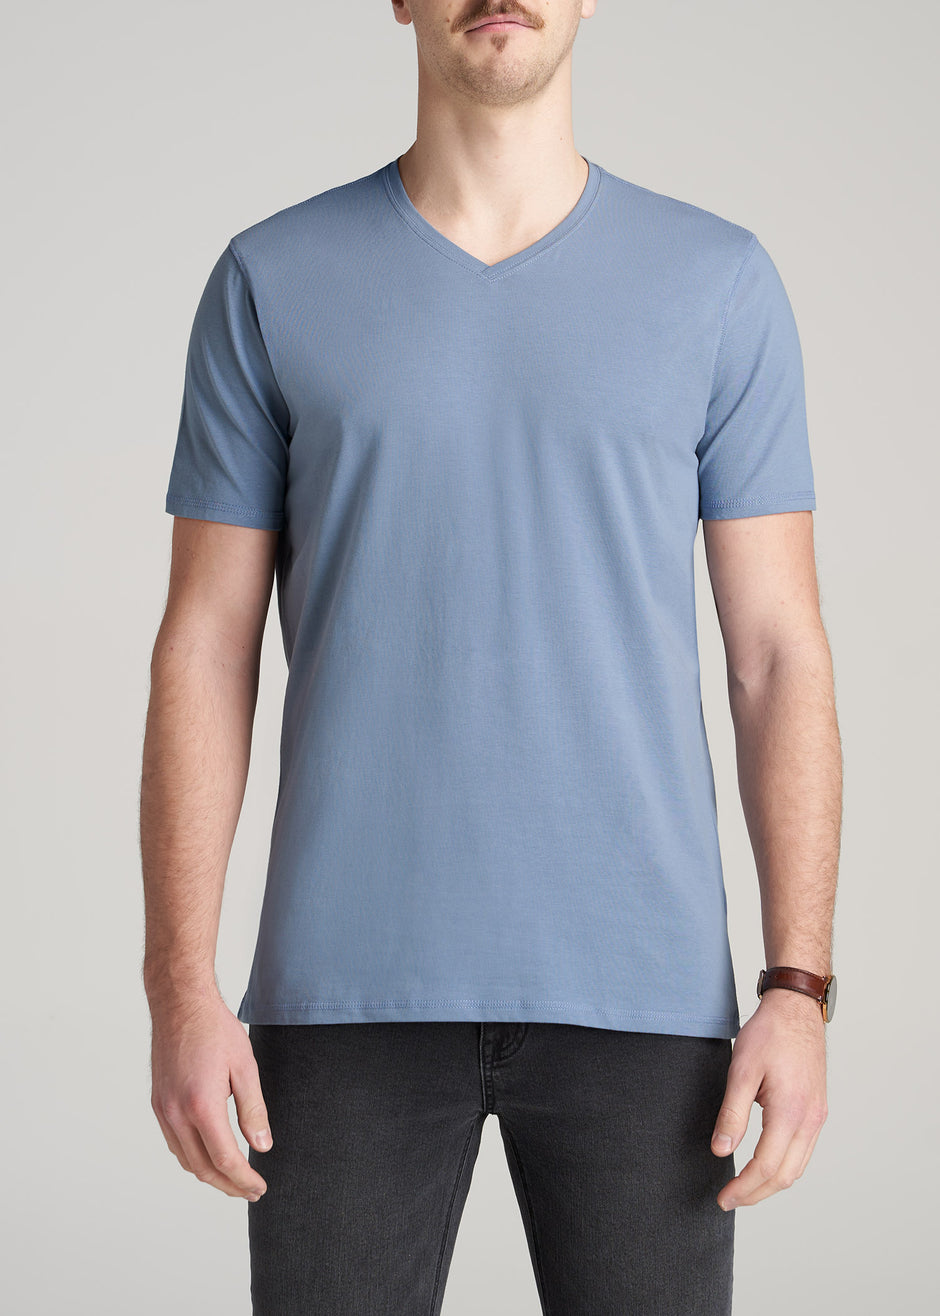 Tall Tees & Tall T-Shirts for Men 6'3